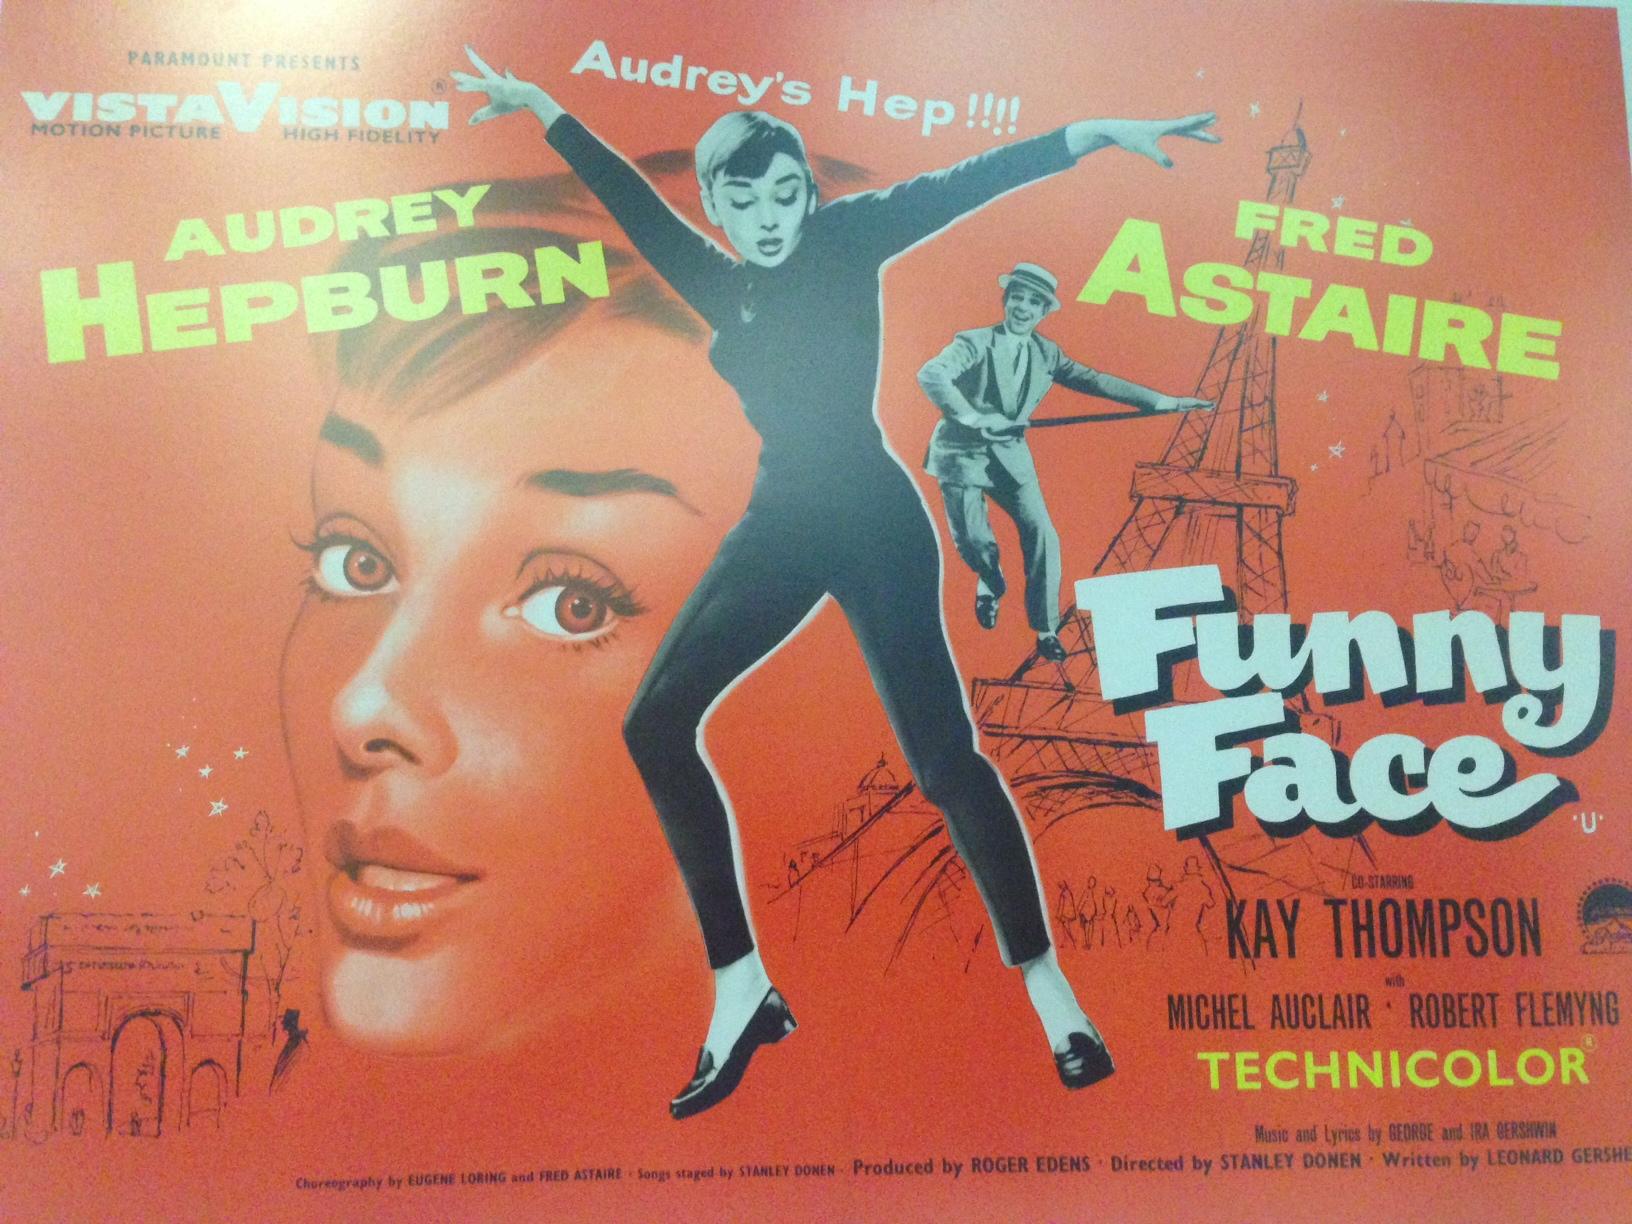 audrey-hepburn-fred-astaire-funny-face-movie-exhibition-design-museum-women-fashion-power